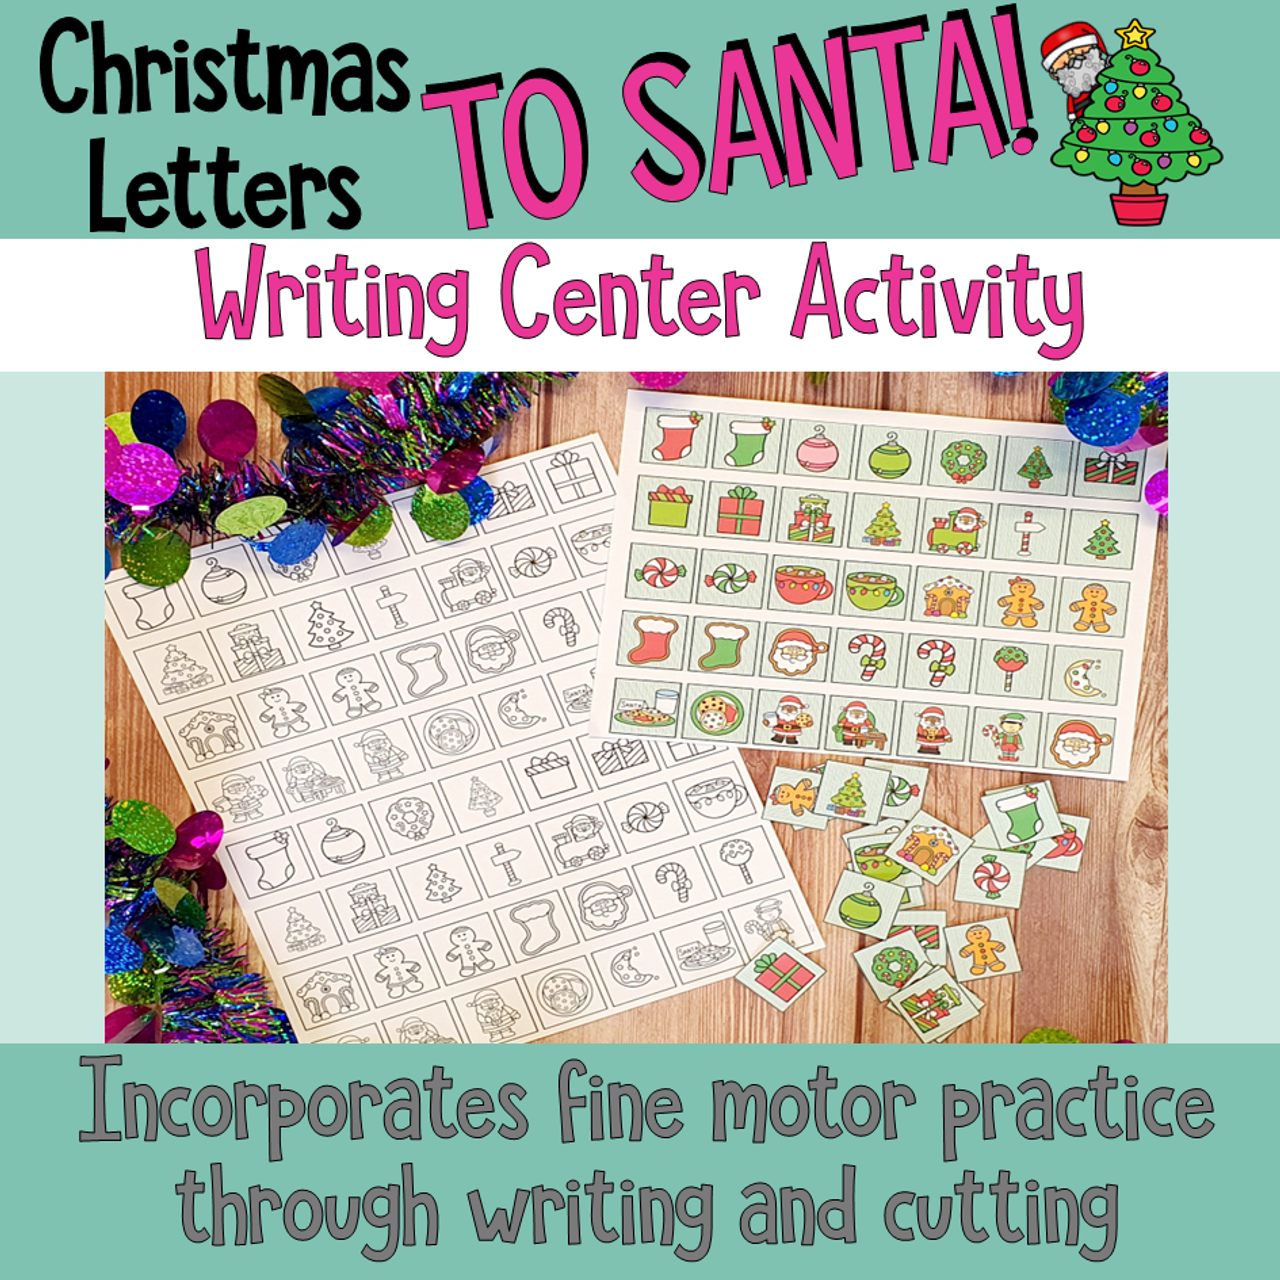 Letters to Santa Christmas Writing Center